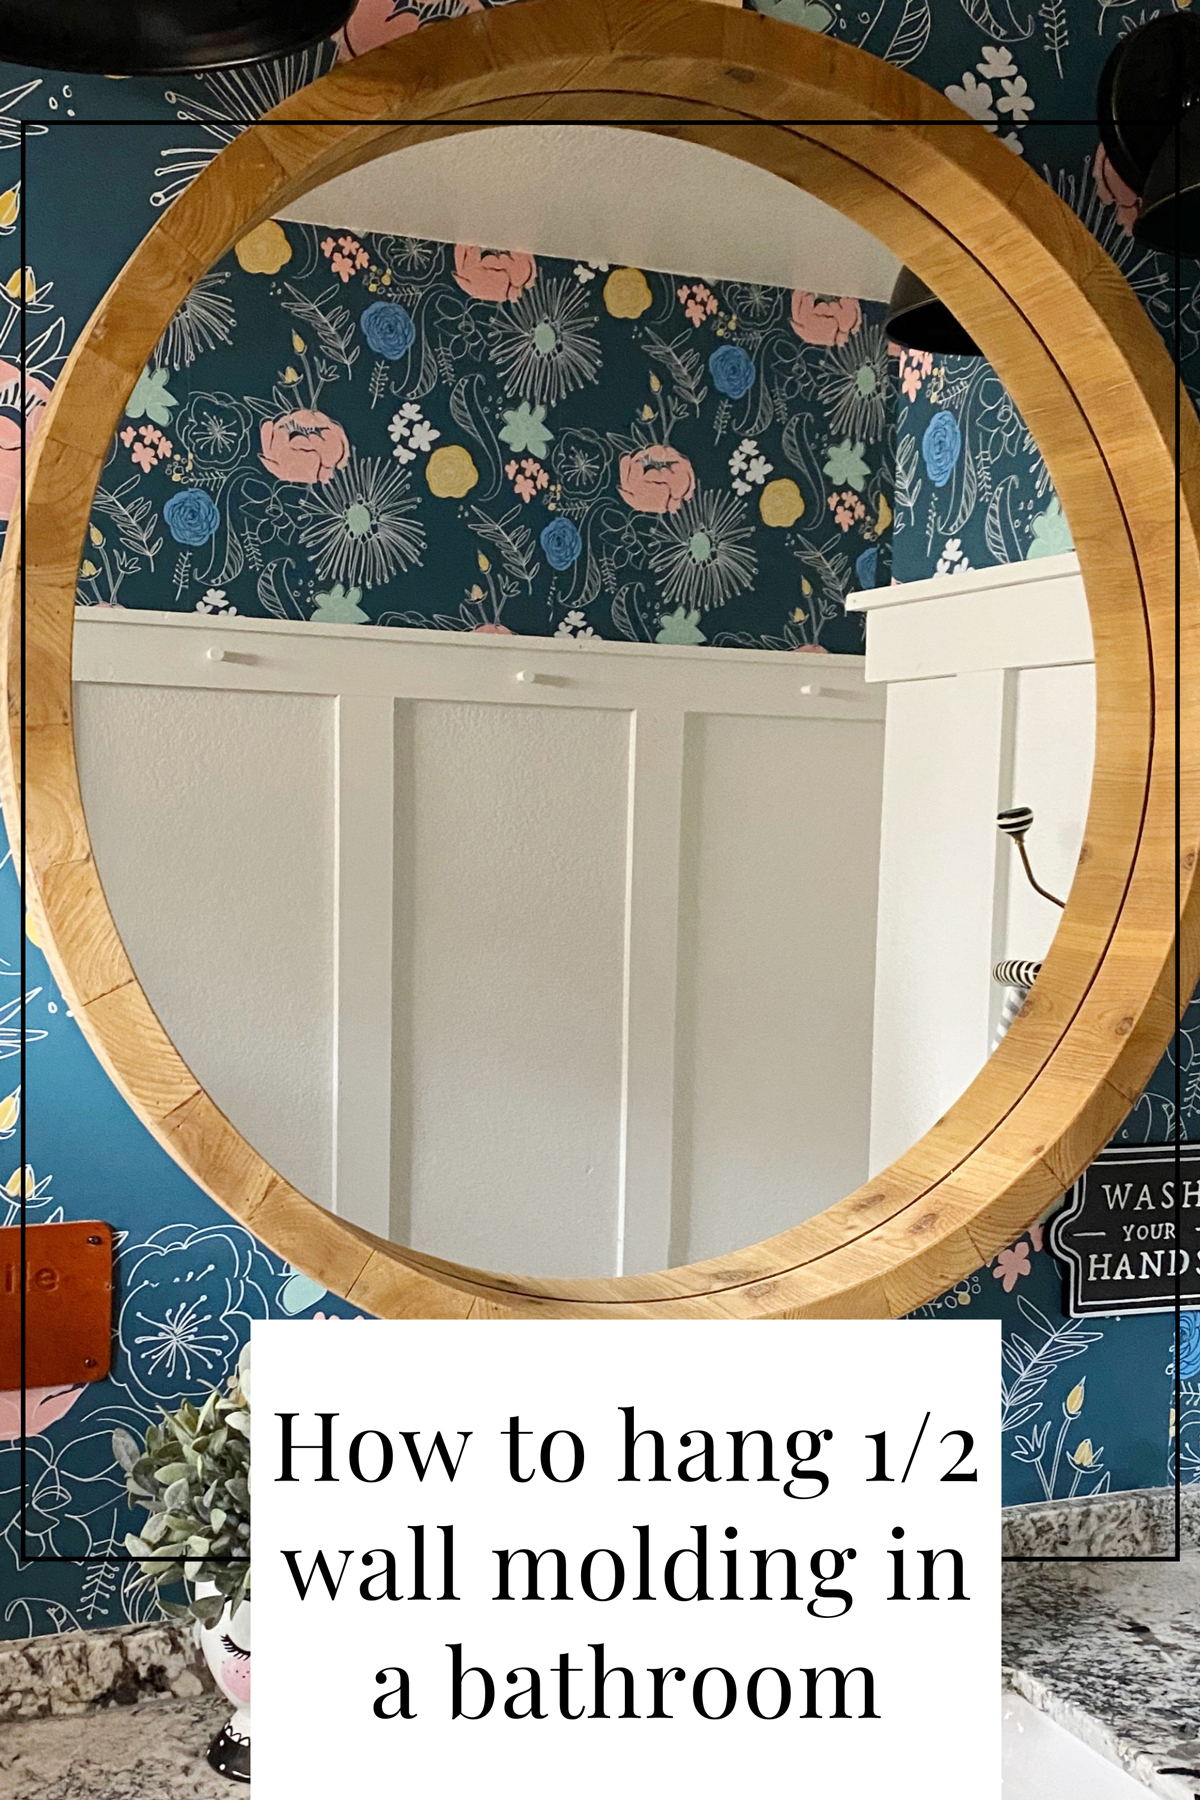 How to hang 1/2 wall molding in the bathroom